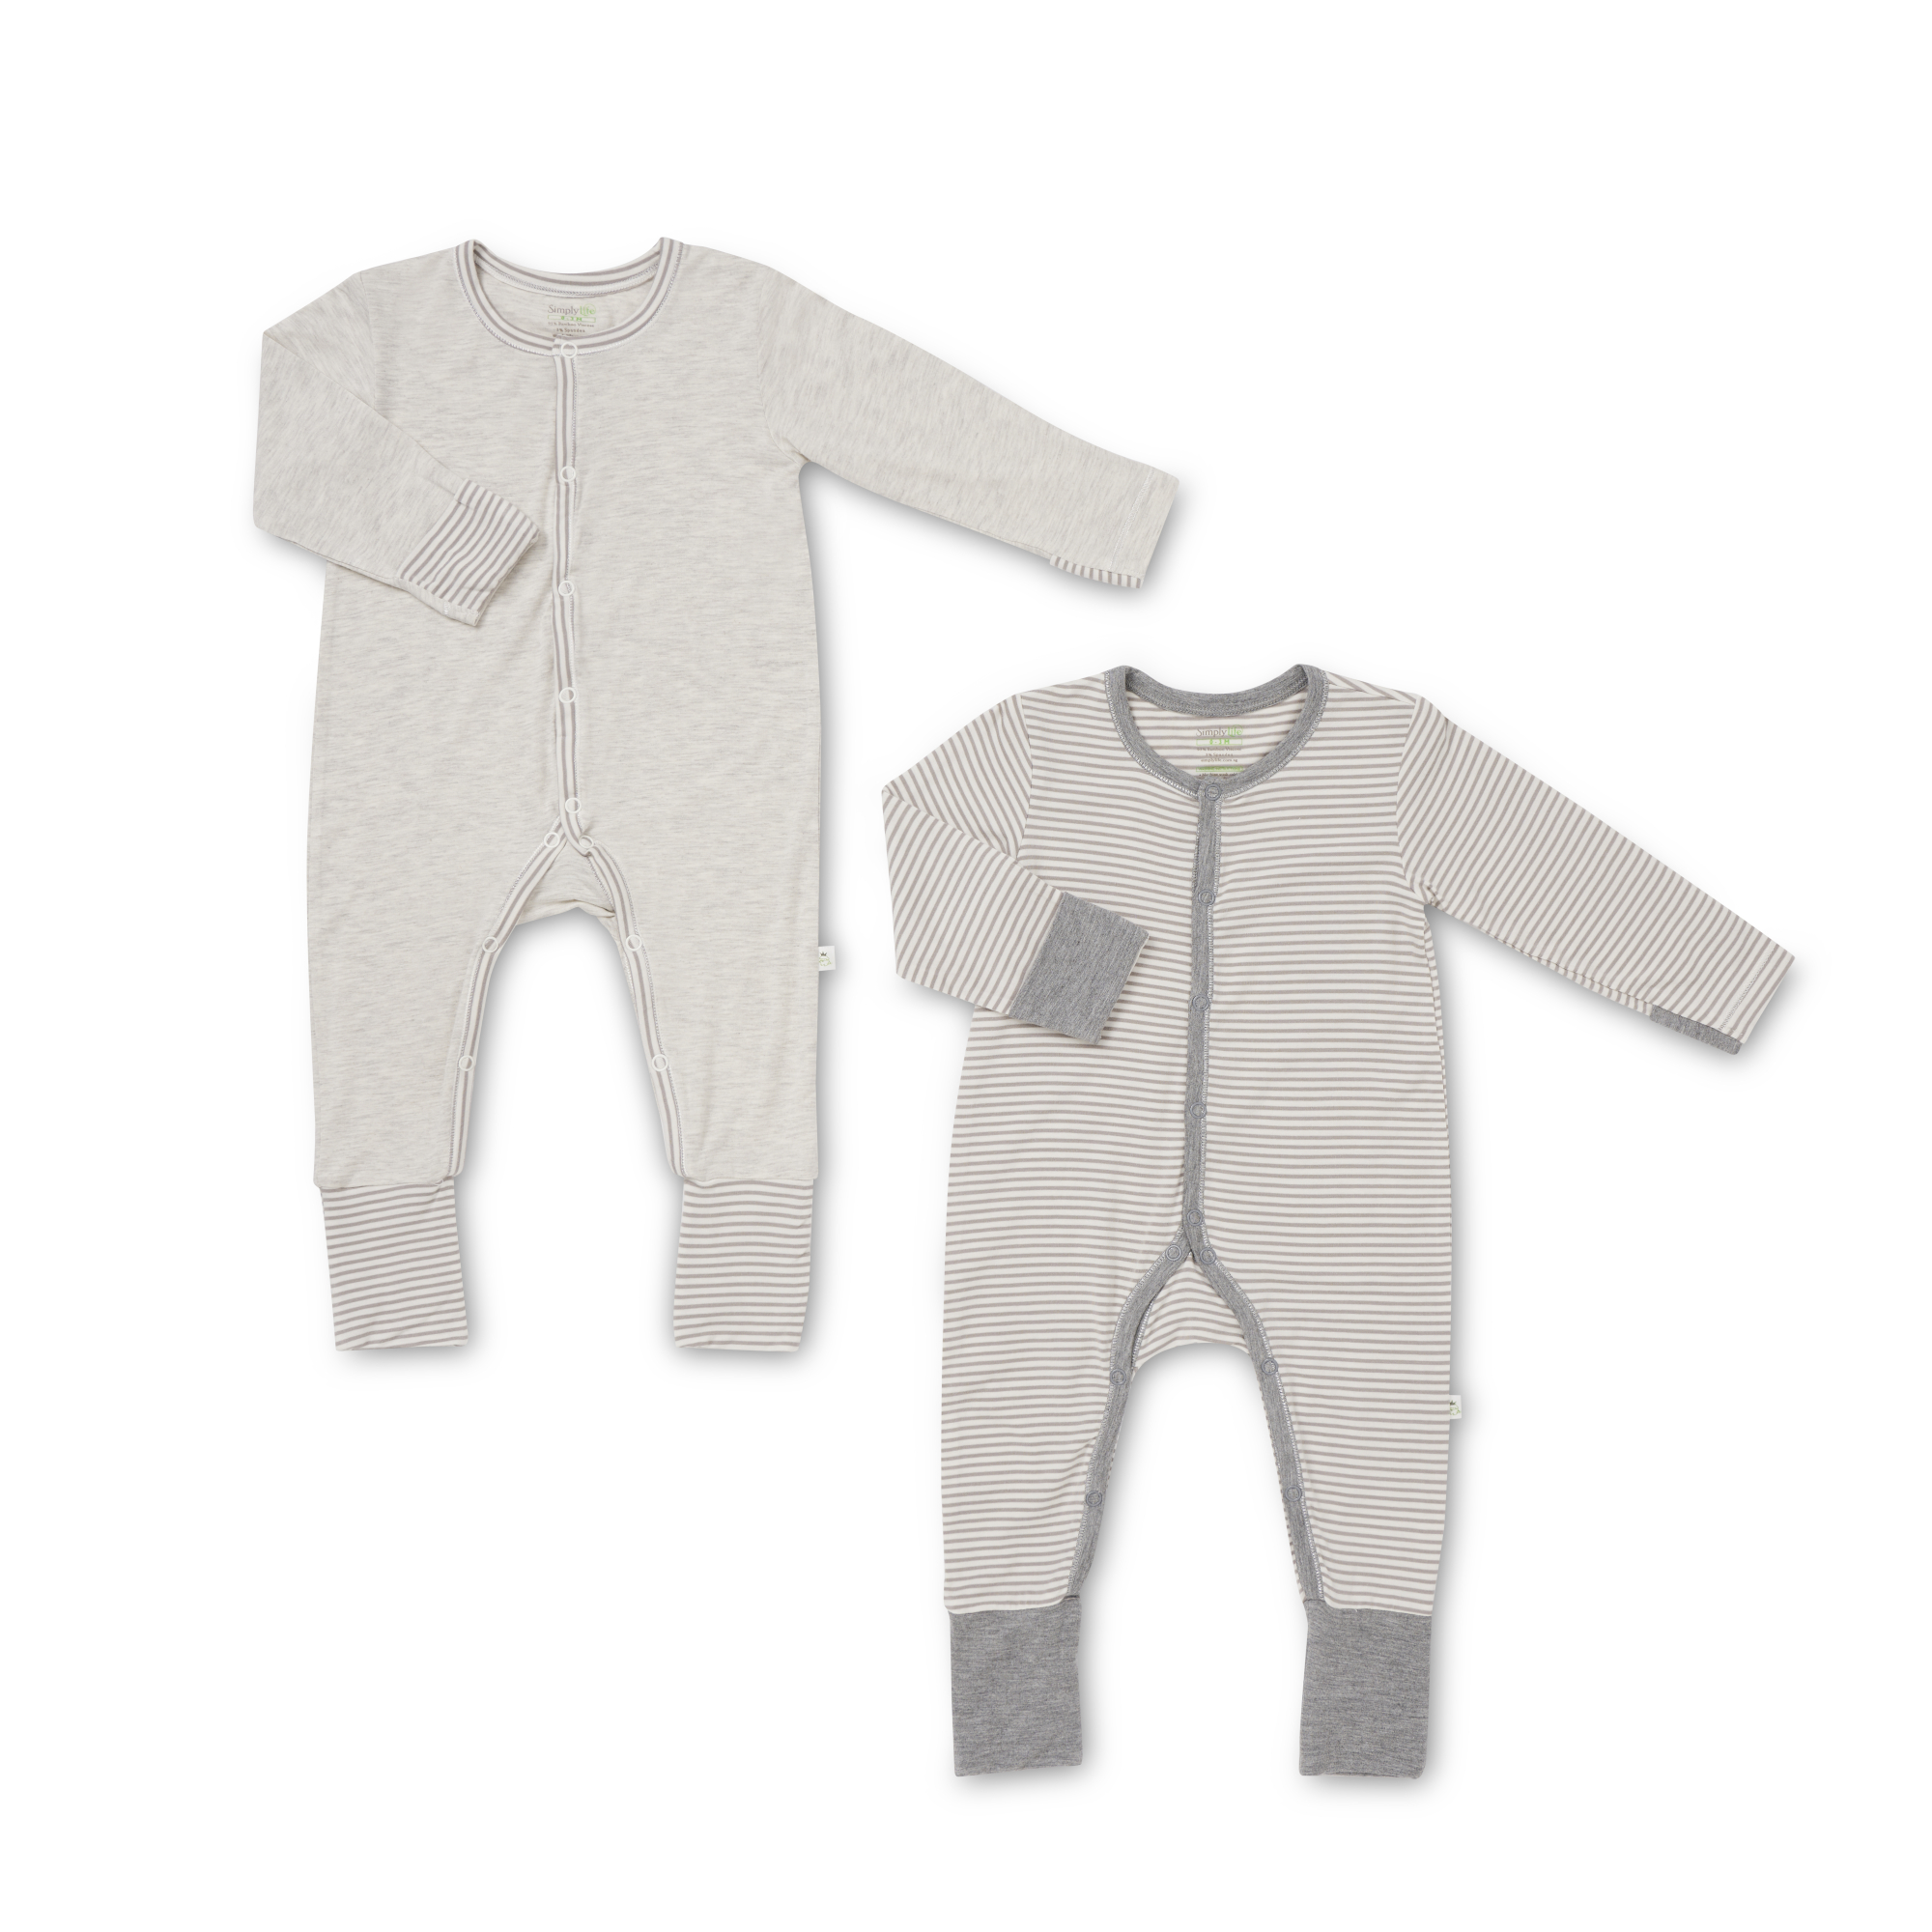 Simply Life Grey Stripes & Sandwash Light Grey - Long-Sleeved Snap Button Sleepsuit with Convertible Cuffs / Mittens & Footie (Value pack of 2)